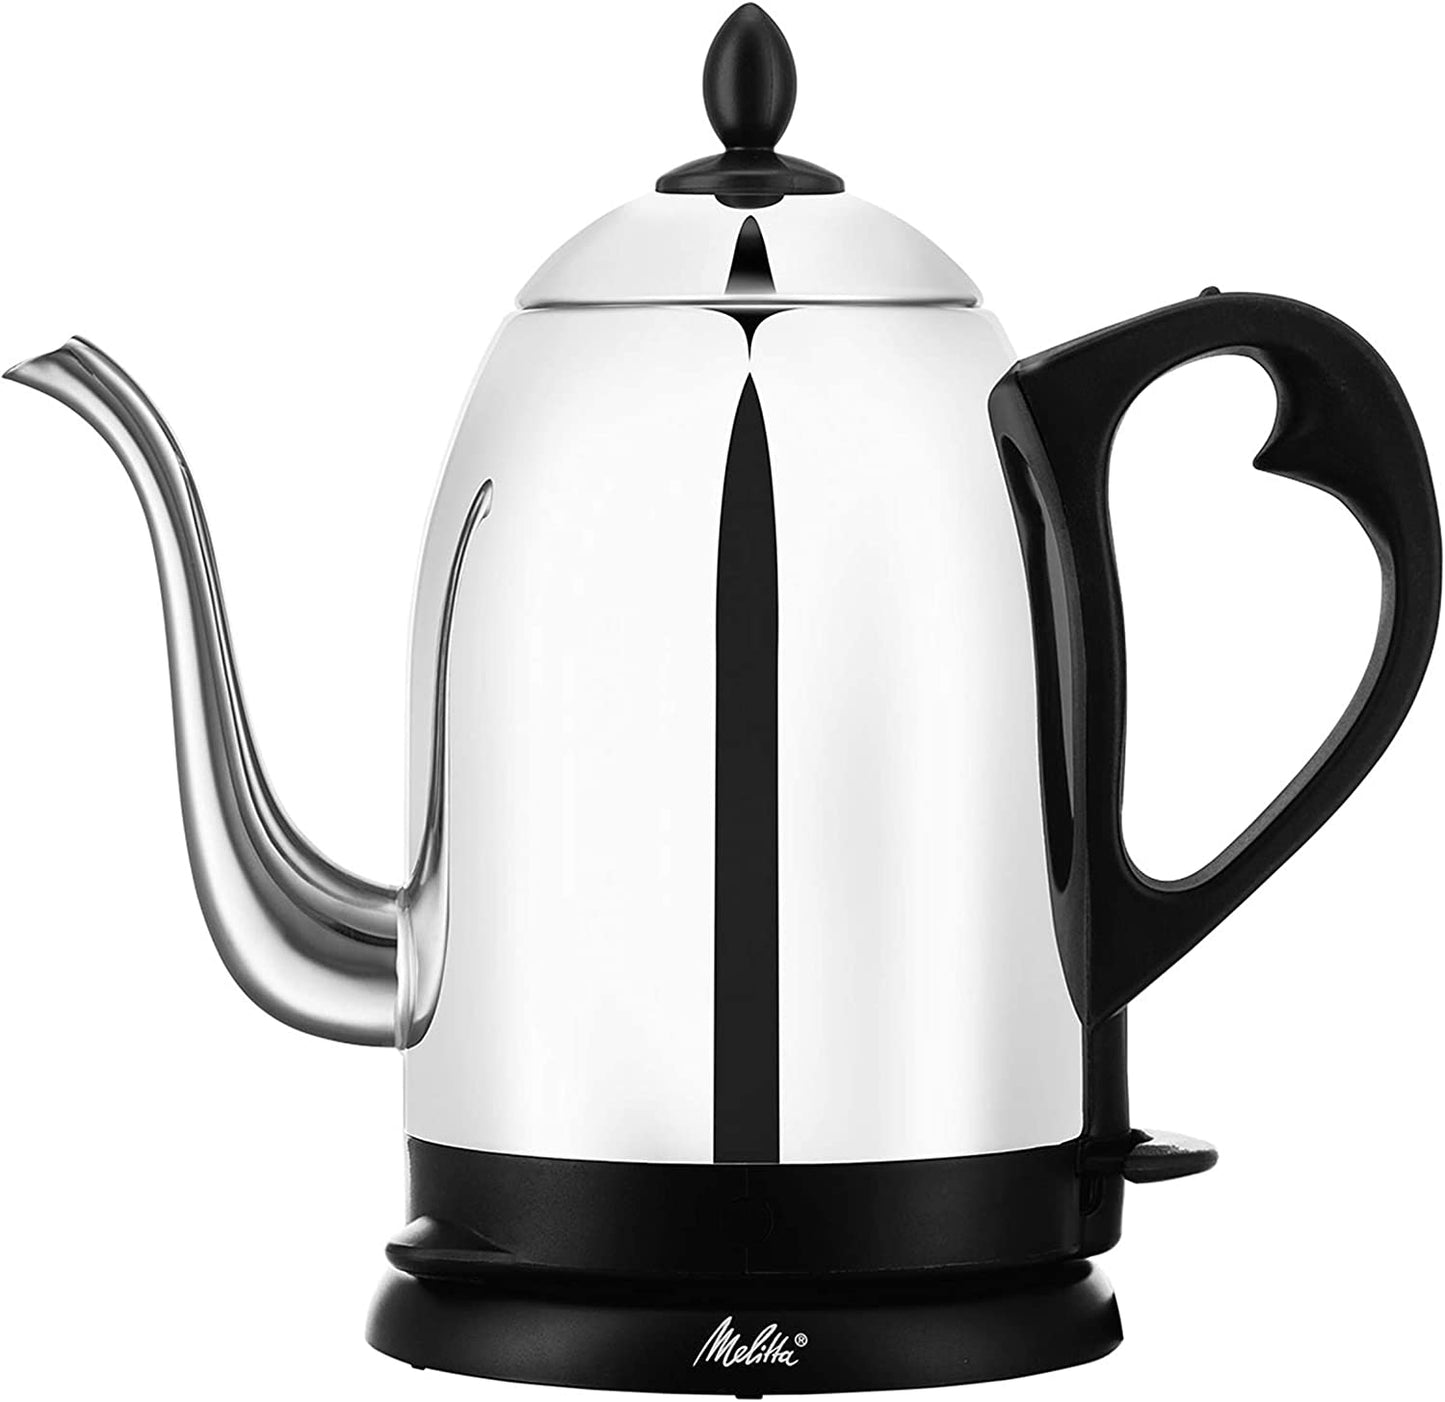 Melitta Deluxe Electric Kettle 1.2L Stainless Steel - Refurbished